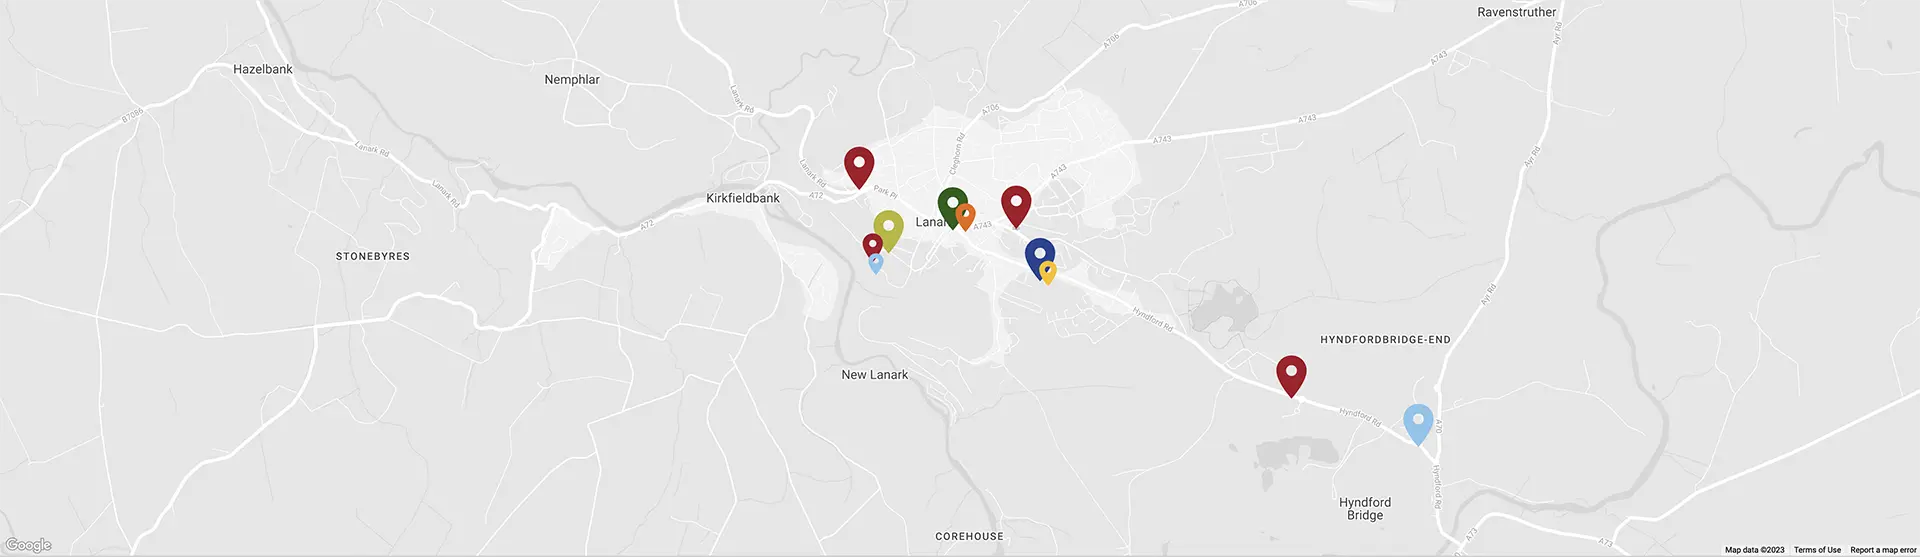 Lanark Map including locations of key projects